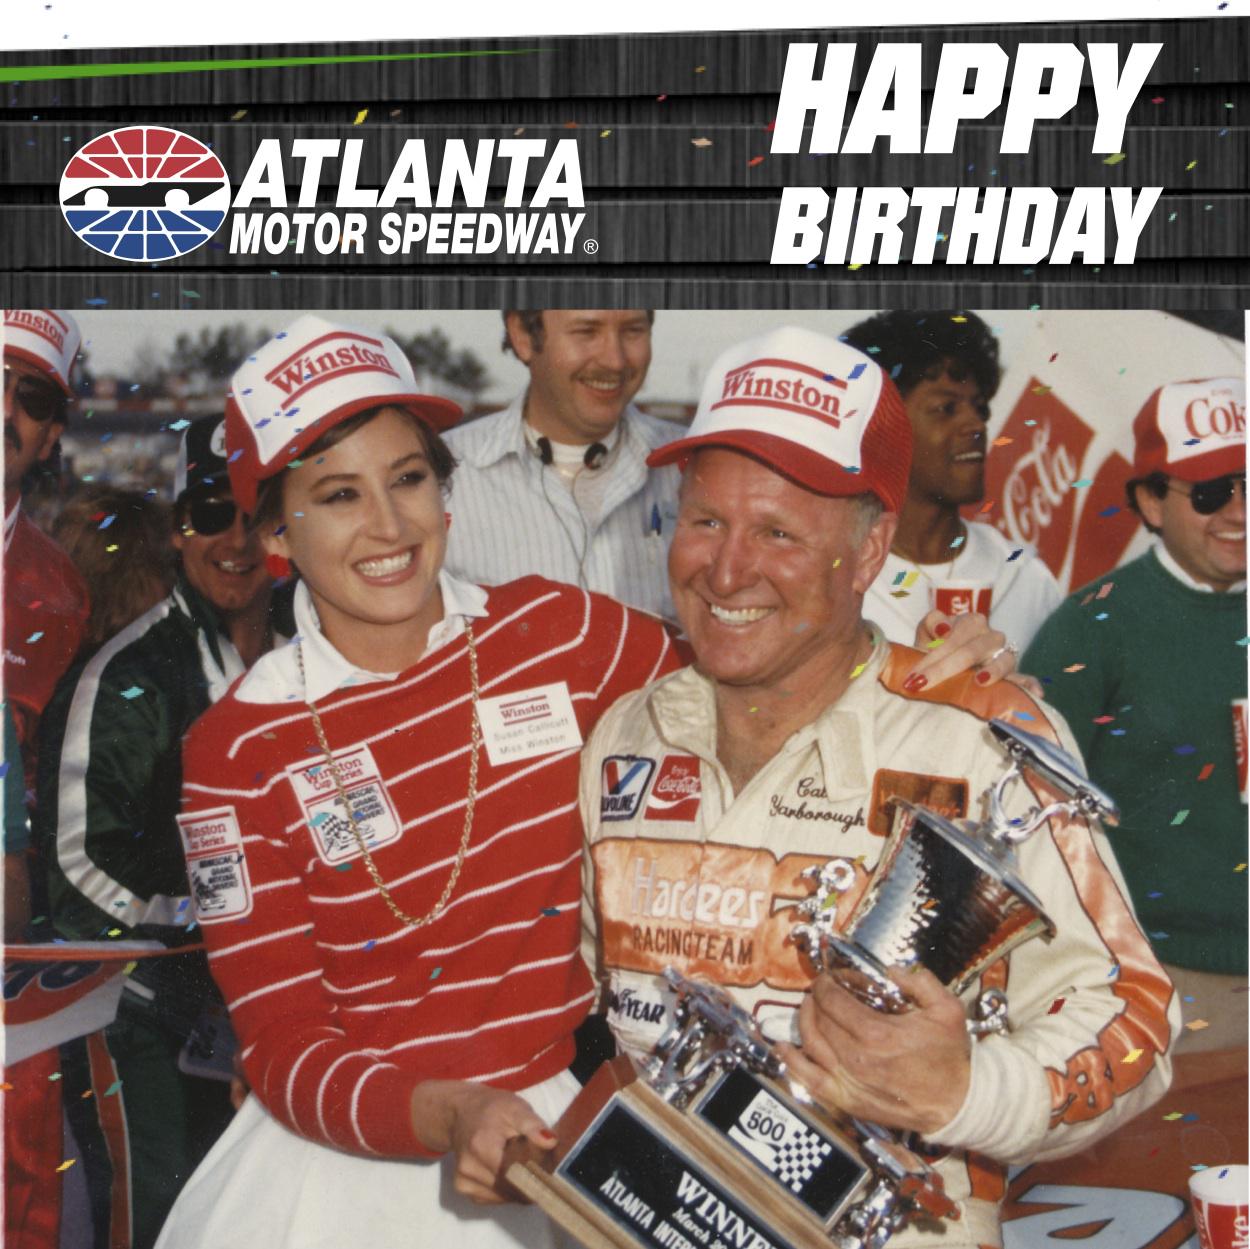 Here\s to a legend celebrating his birthday today! Happy birthday wishes to Cale Yarborough! 